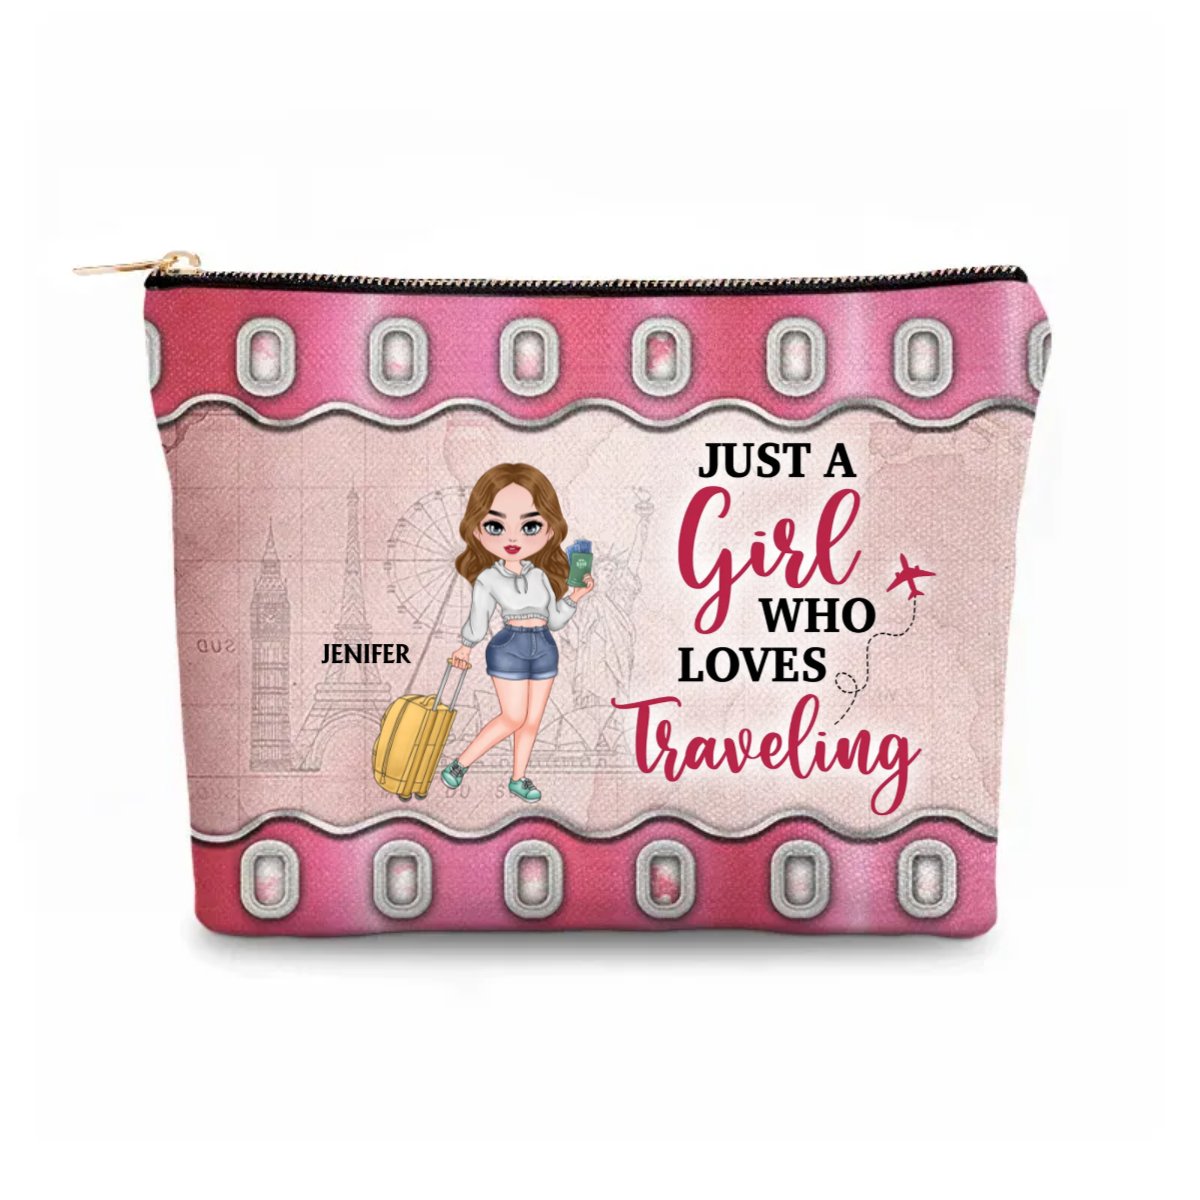 Travel - Just A Girl Who Loves Traveling - Personalized Cosmetic Bag - The Next Custom Gift